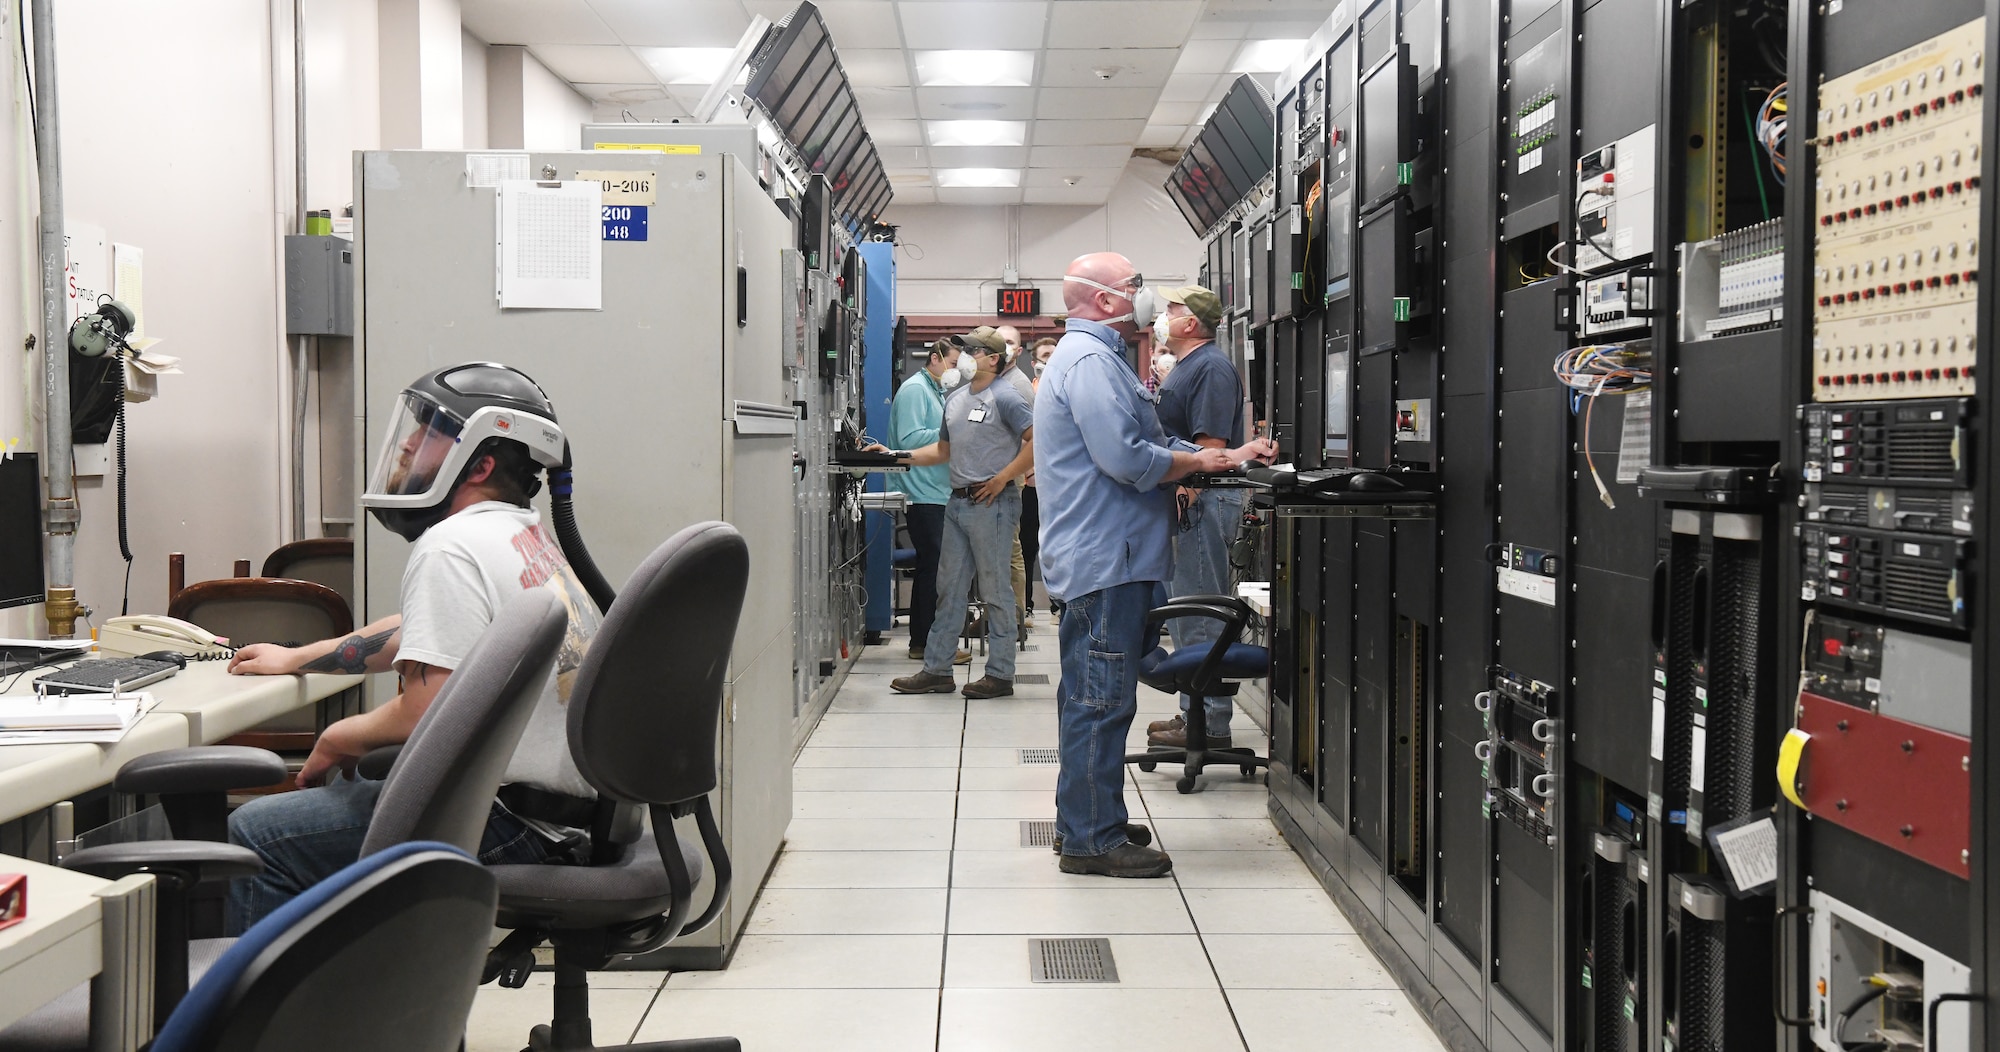 Seven Hroncich, left, an instrument technician, Robert Bradford, center right, an electrician, Kevin Thompson, right, test operations engineer, Tim Mullins, an outside machinist, and others prepare for a test run in the Arnold Engineering Development Complex (AEDC) Arcs Test Facility Control Room, May 5, 2020, at Arnold Air Force Base, Tenn. The Arcs Facility provides aerothermal ground test simulations of hypersonic flight over a wide range of velocities and pressure altitudes in support of materials and structures development. Team members are maintaining social distancing when possible and wearing masks when not so they can continue the critical national defense mission of AEDC. (U.S. Air Force photo by Jill Pickett) (This image was altered by obscuring items for security purposes.)